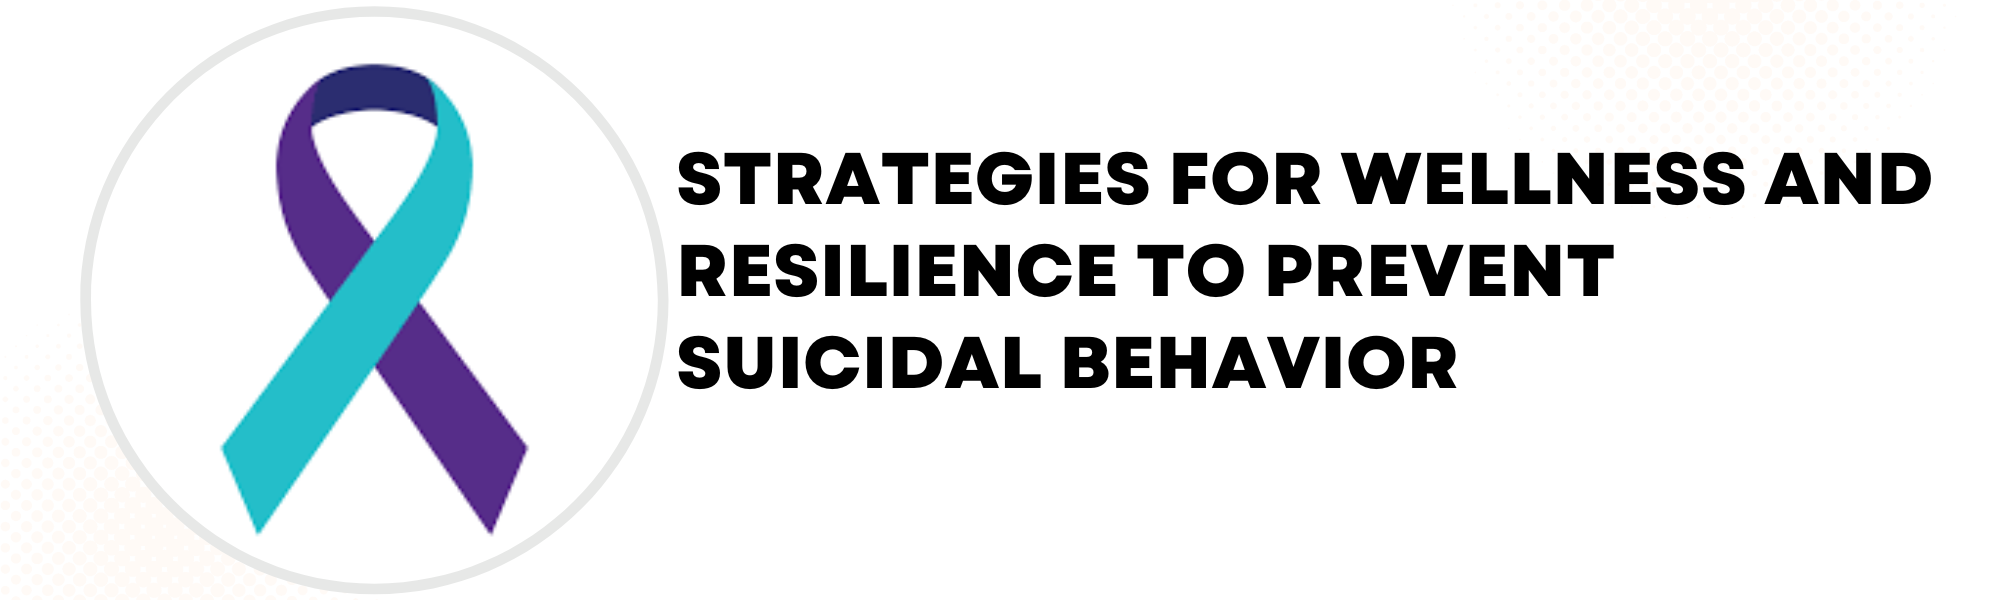 Strategies for Wellness and Resilience to Prevent Suicidal Behavior Banner